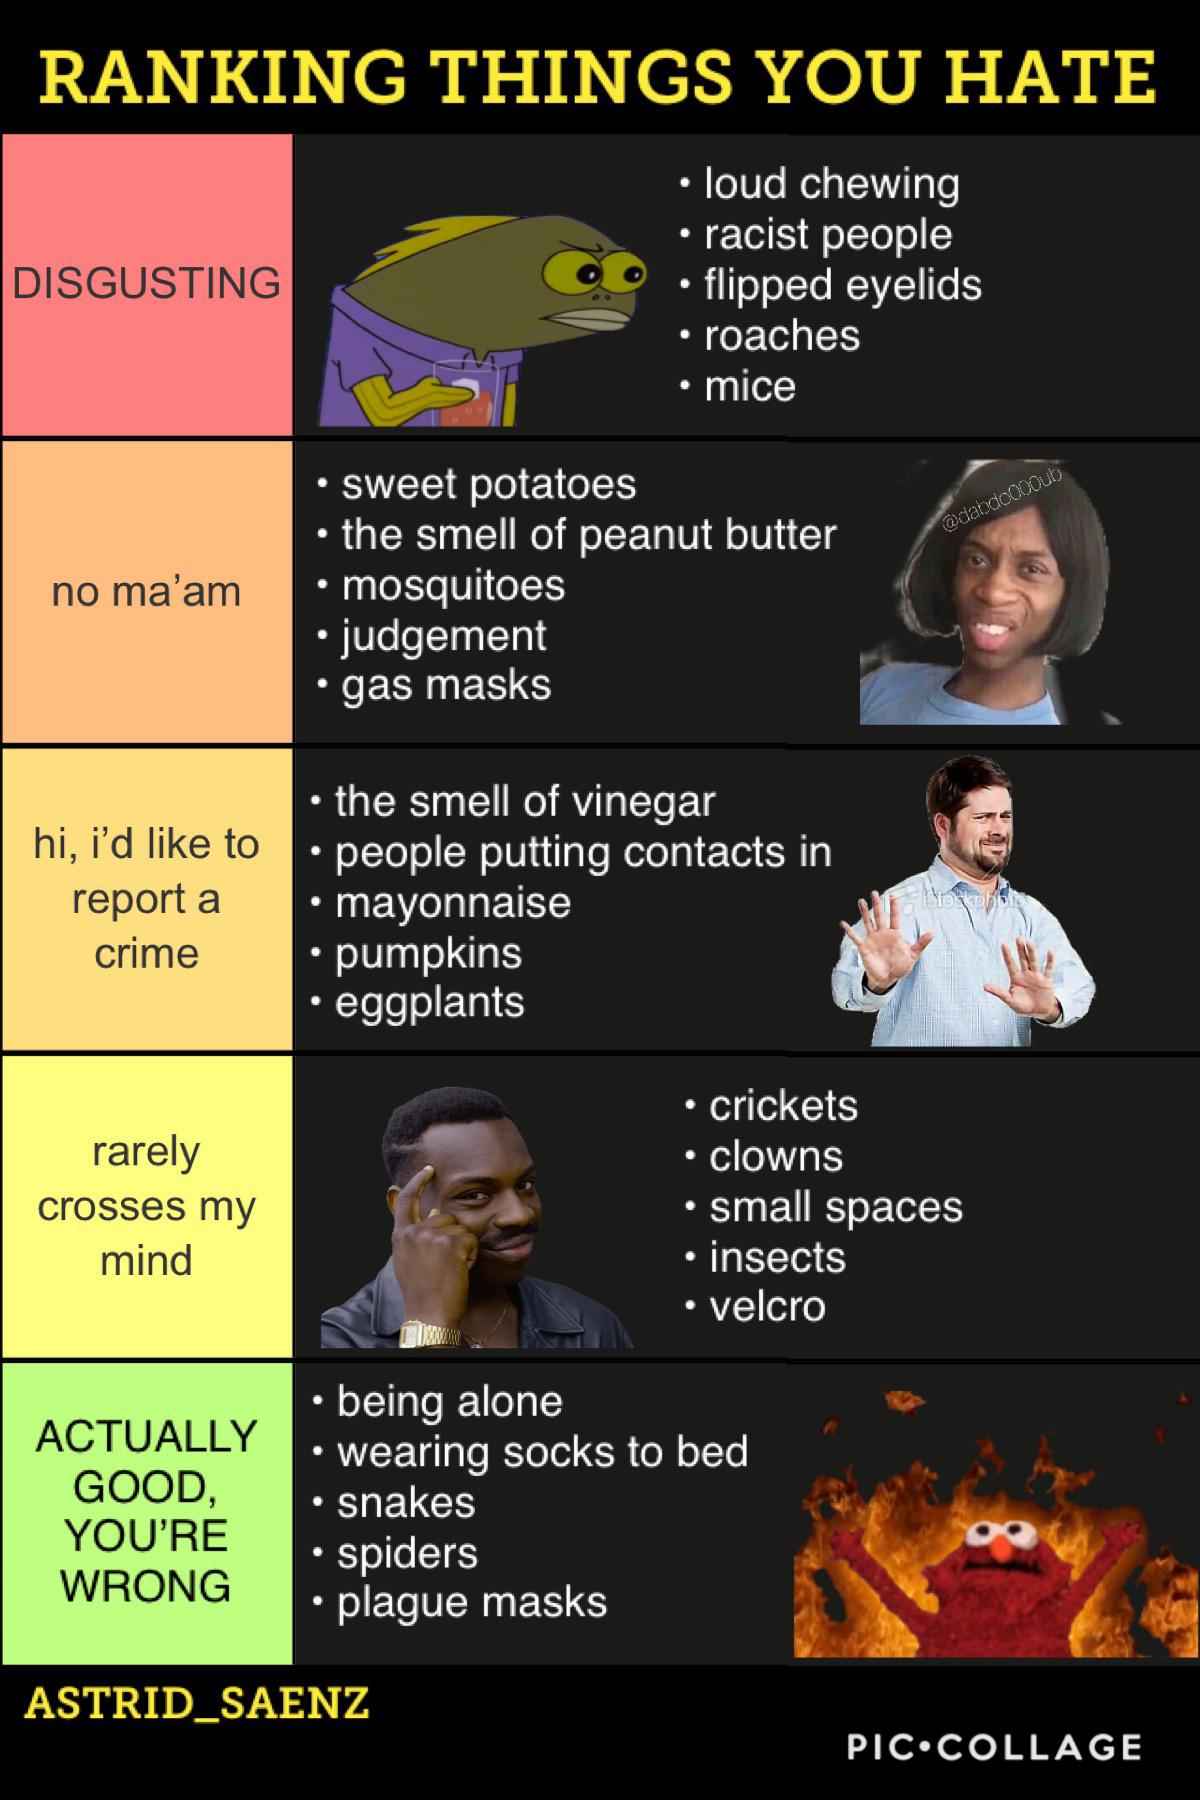 so i asked you all at @GrowingUp to mention some things you didn’t like and here’s my masterpiece (couldn’t let the tier trend slide) 😂 i probably laughed way too much while making this but all i gotta say is, if you’re into mayonnaise: JAIL!